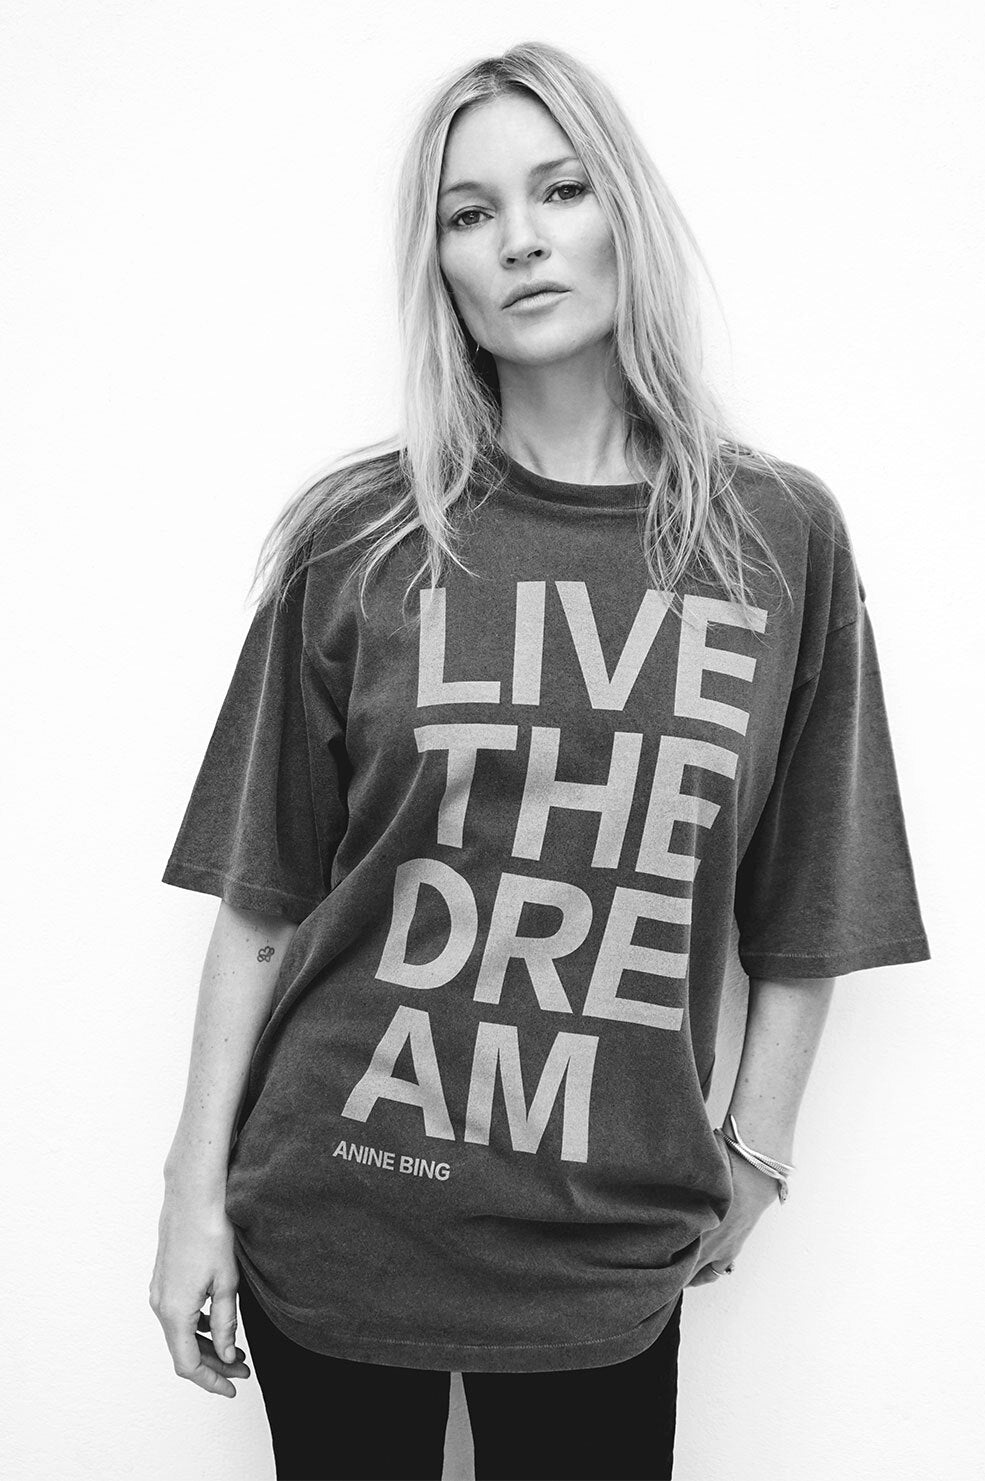 ANINE BING Cason Tee Live The Dream - Washed Black - On Kate Moss